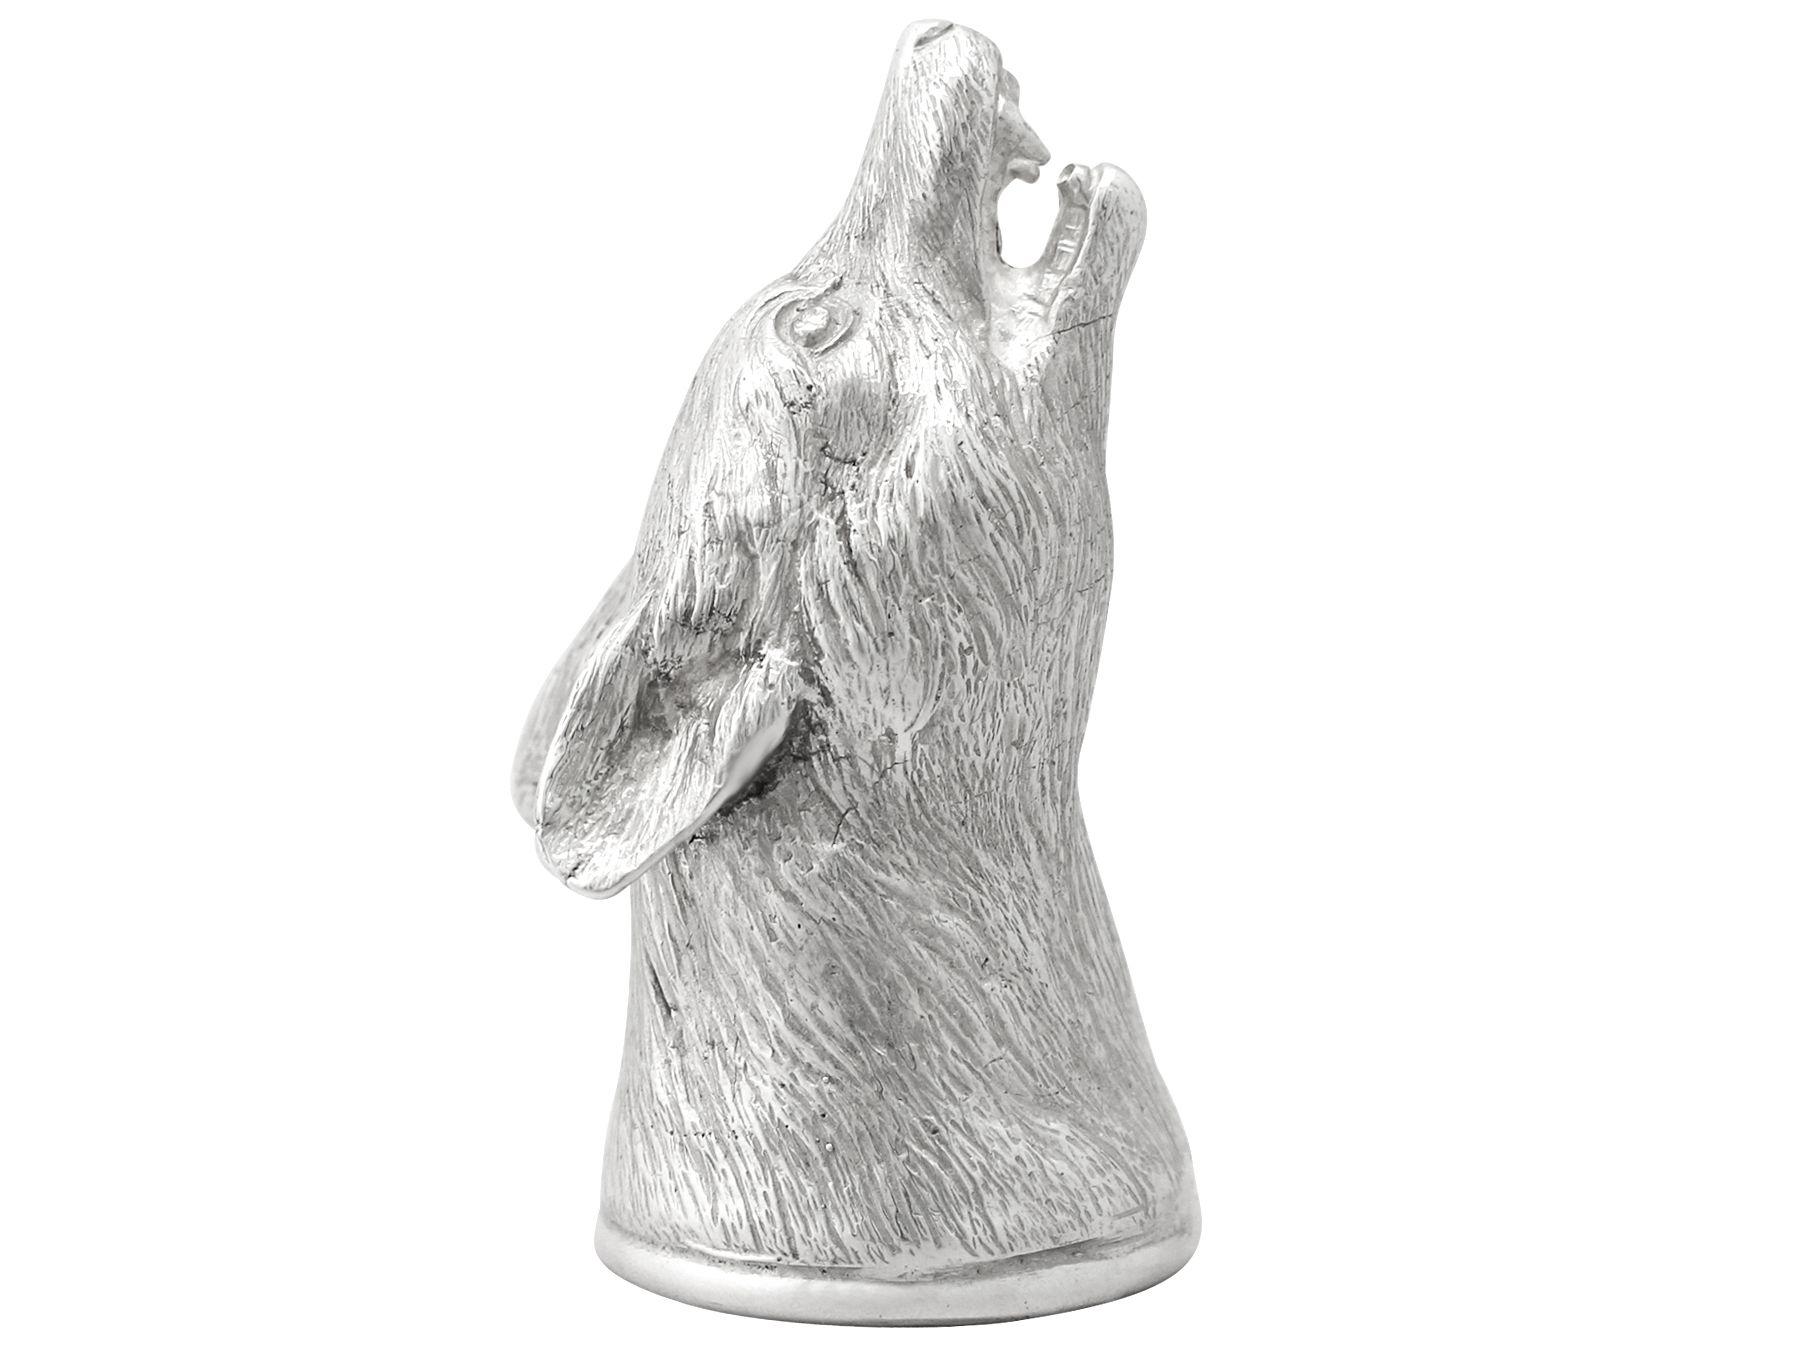 An exceptional, fine and impressive contemporary cast sterling silver stirrup cup modelled in the form of a fox's head; an addition to our diverse silver drinking vessels collection.

This exceptional contemporary sterling silver stirrup cup has